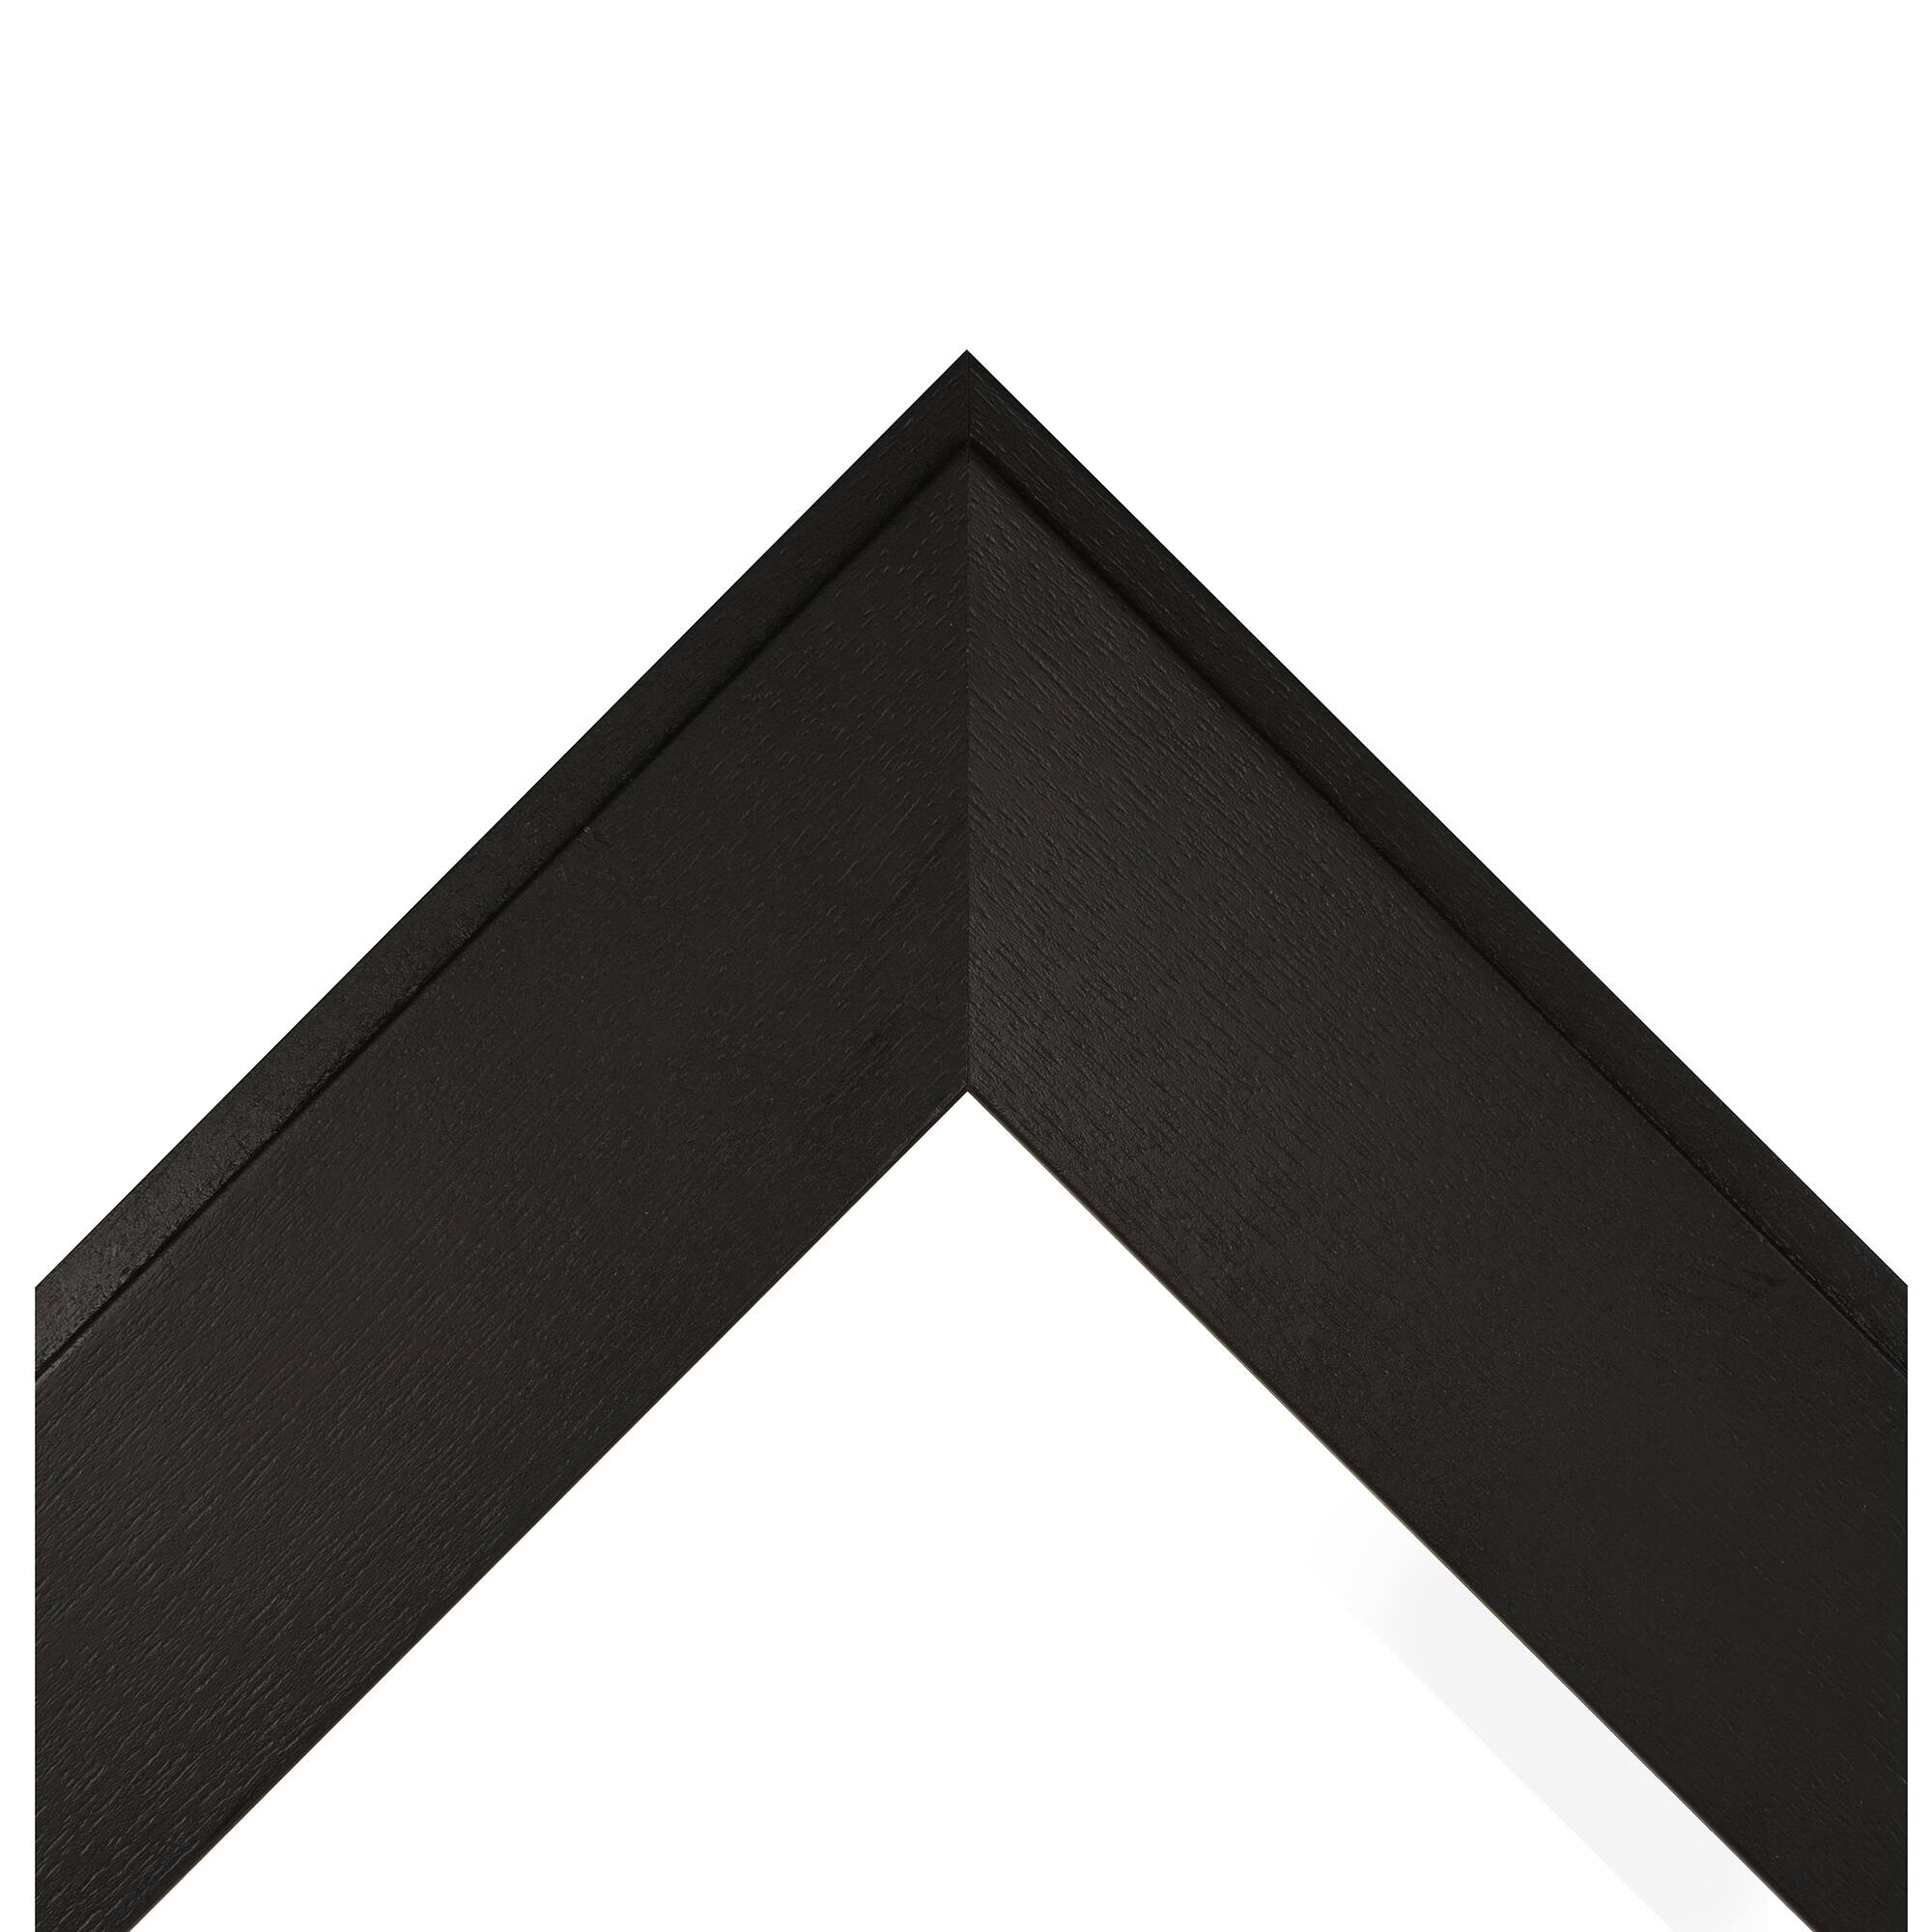 Find The Black Coppell Custom Frame Modern Simplicity Collection At Michaels